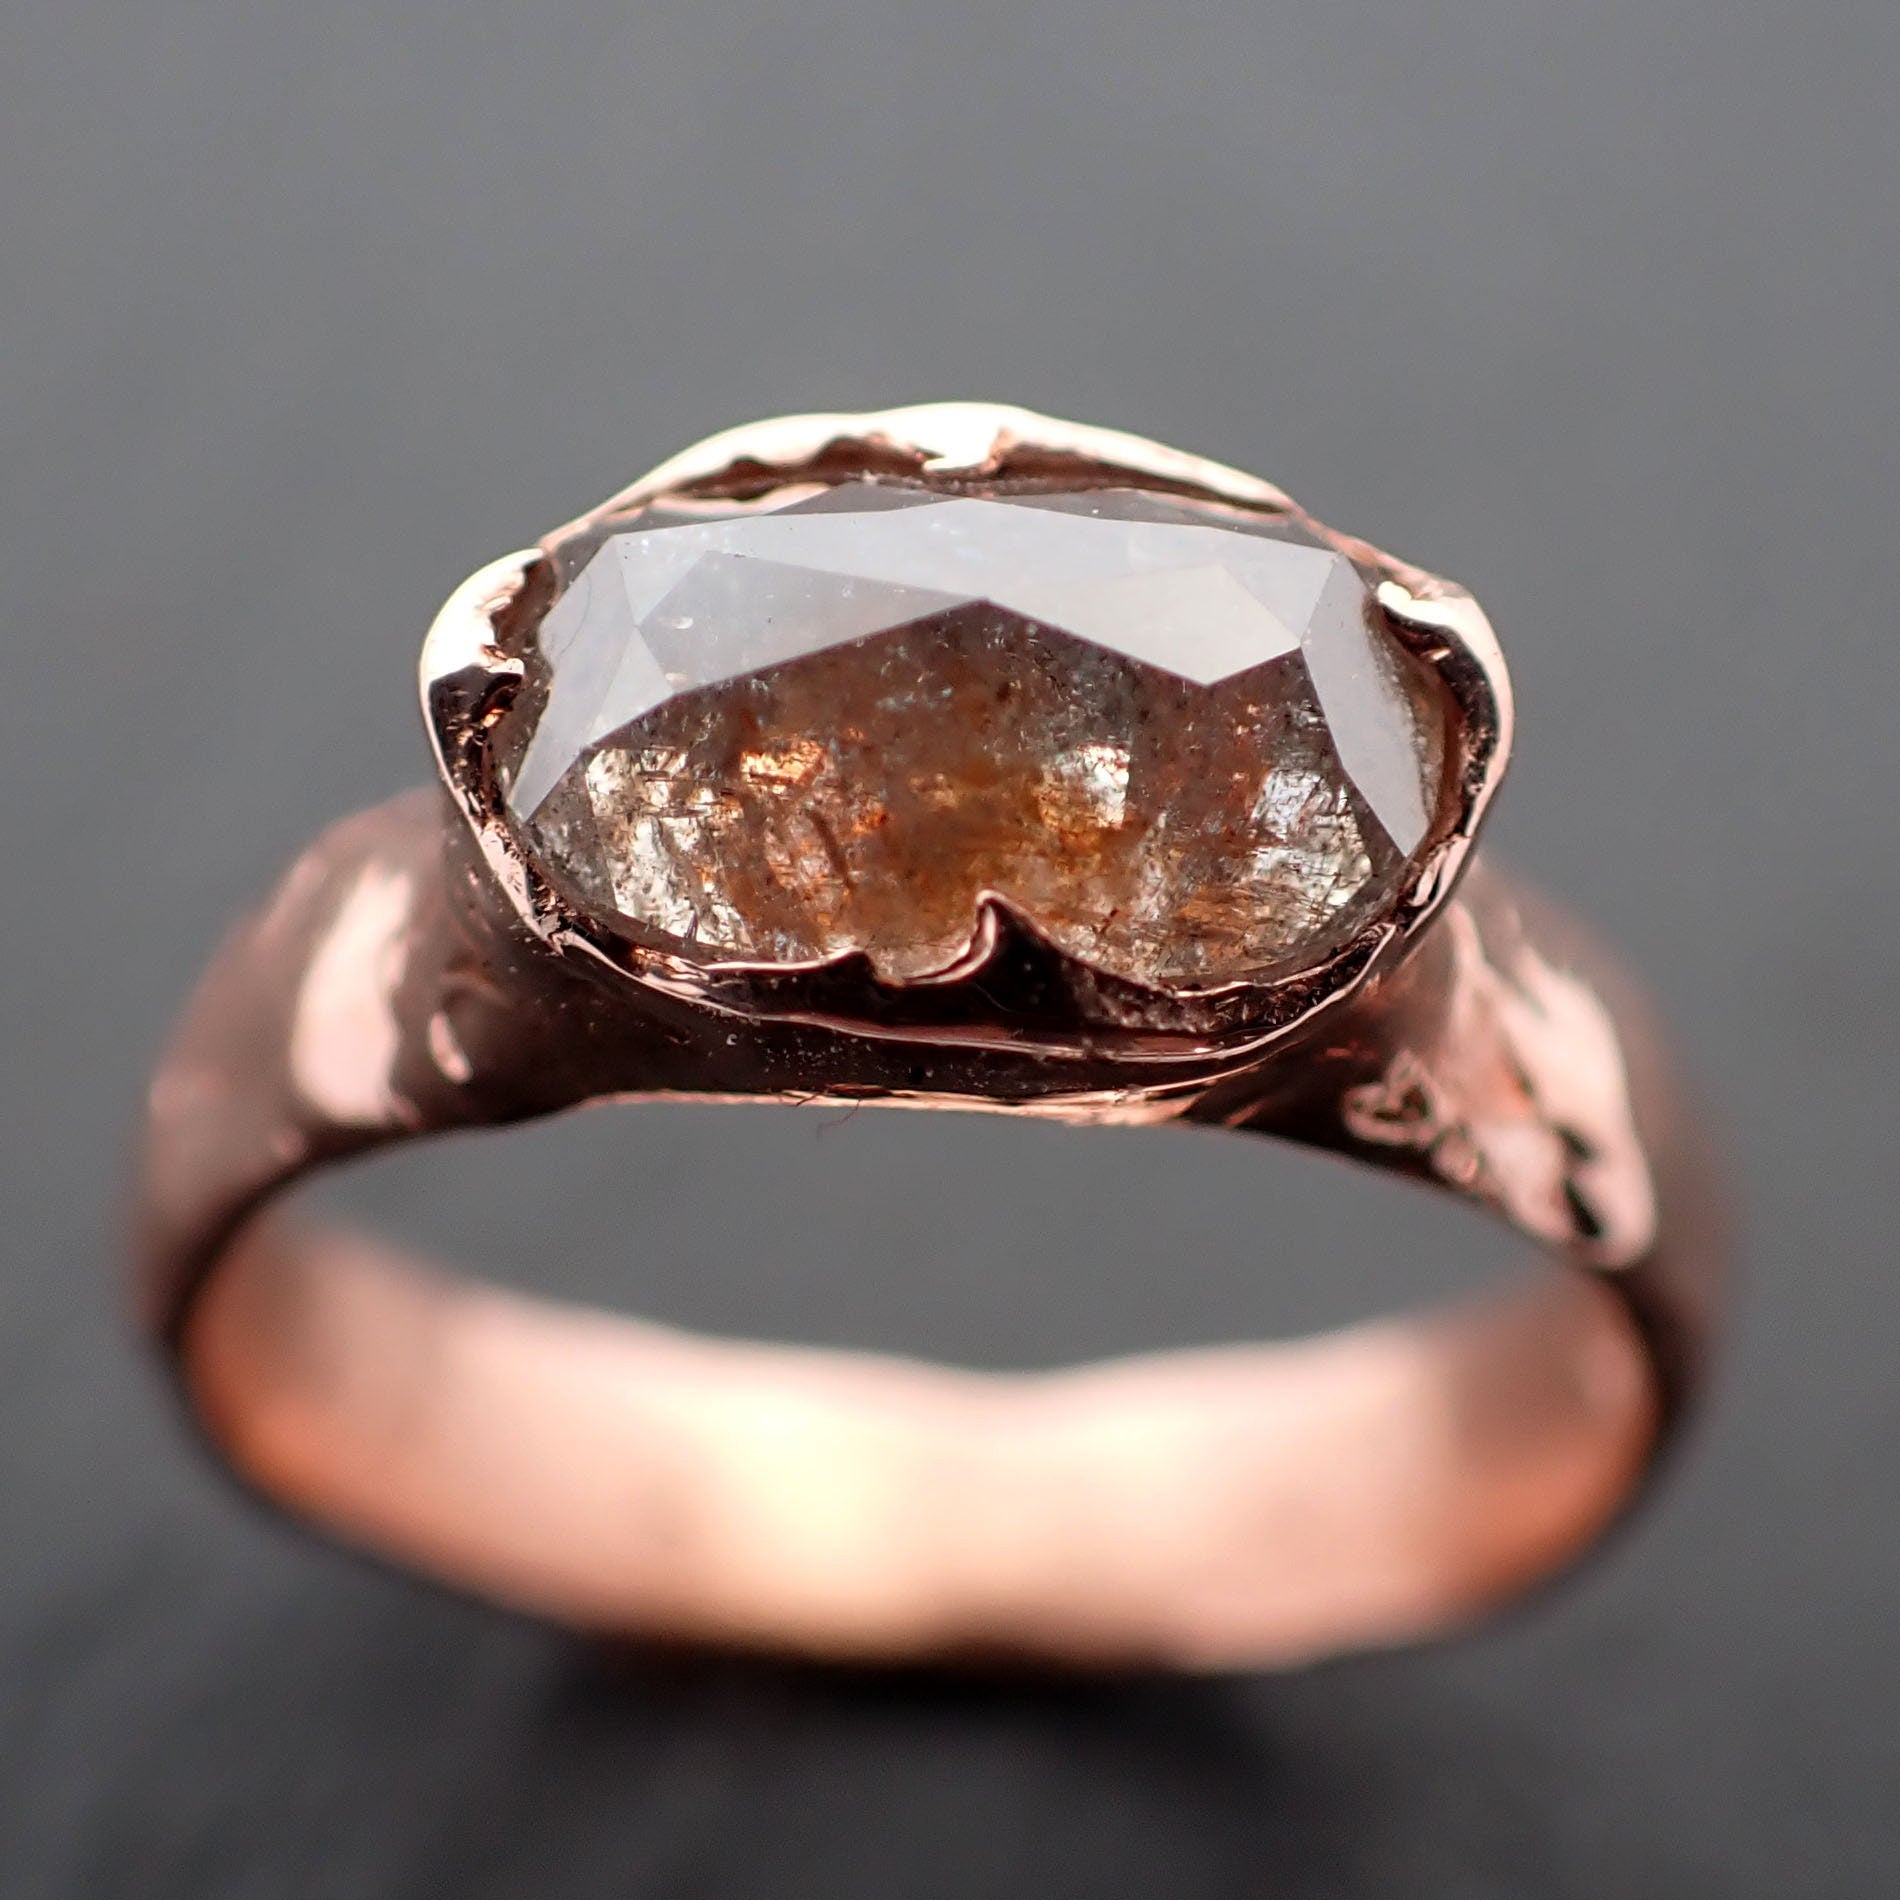 Fancy cut Coral Solitaire Diamond Engagement 14k Rose Gold Wedding Ring byAngeline 3467